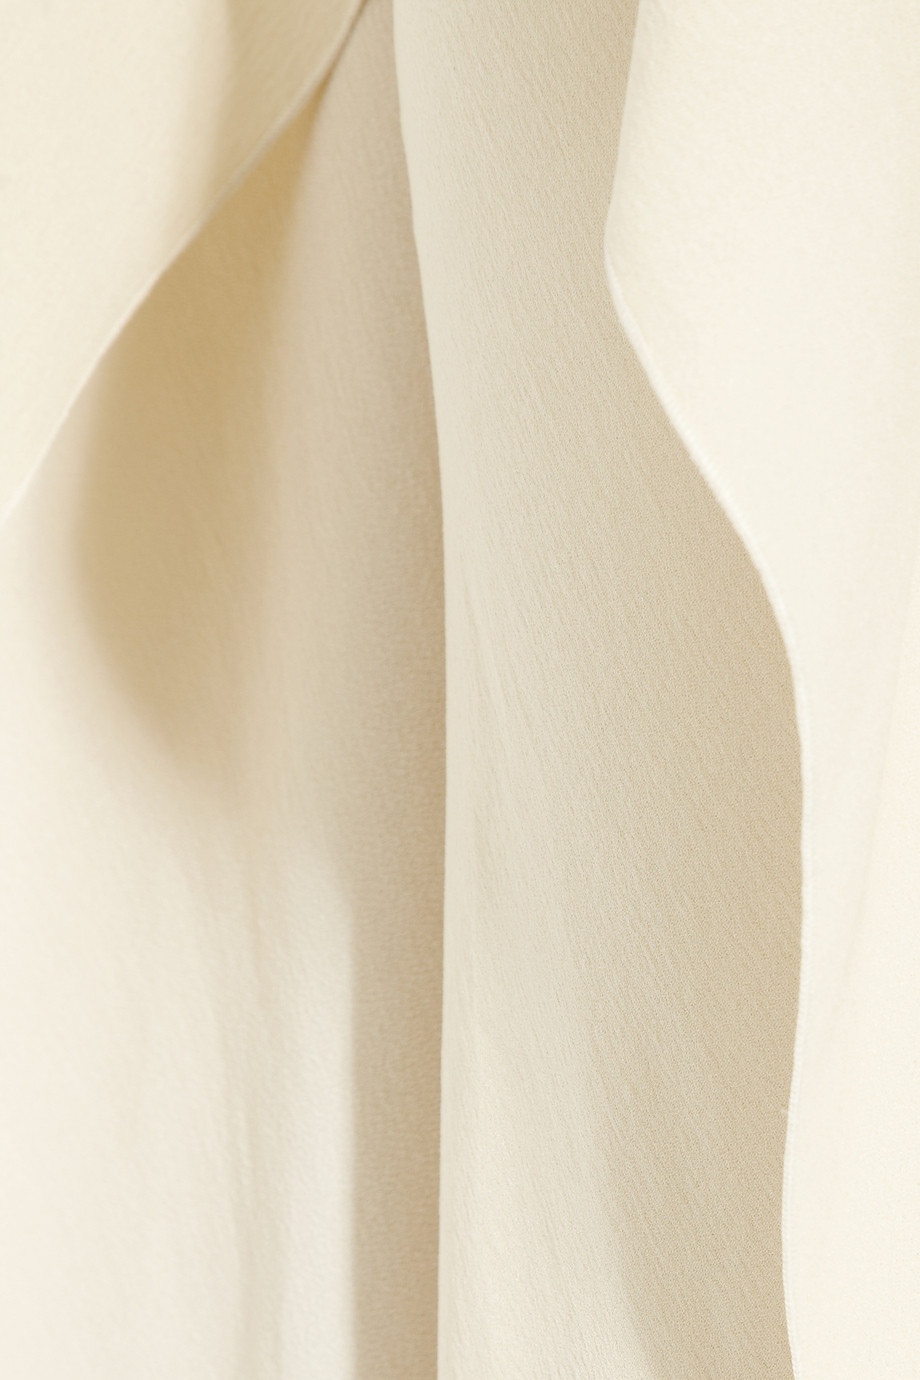 Lyst - Lanvin Asymmetric Washed Silk-crepe Gown in Natural